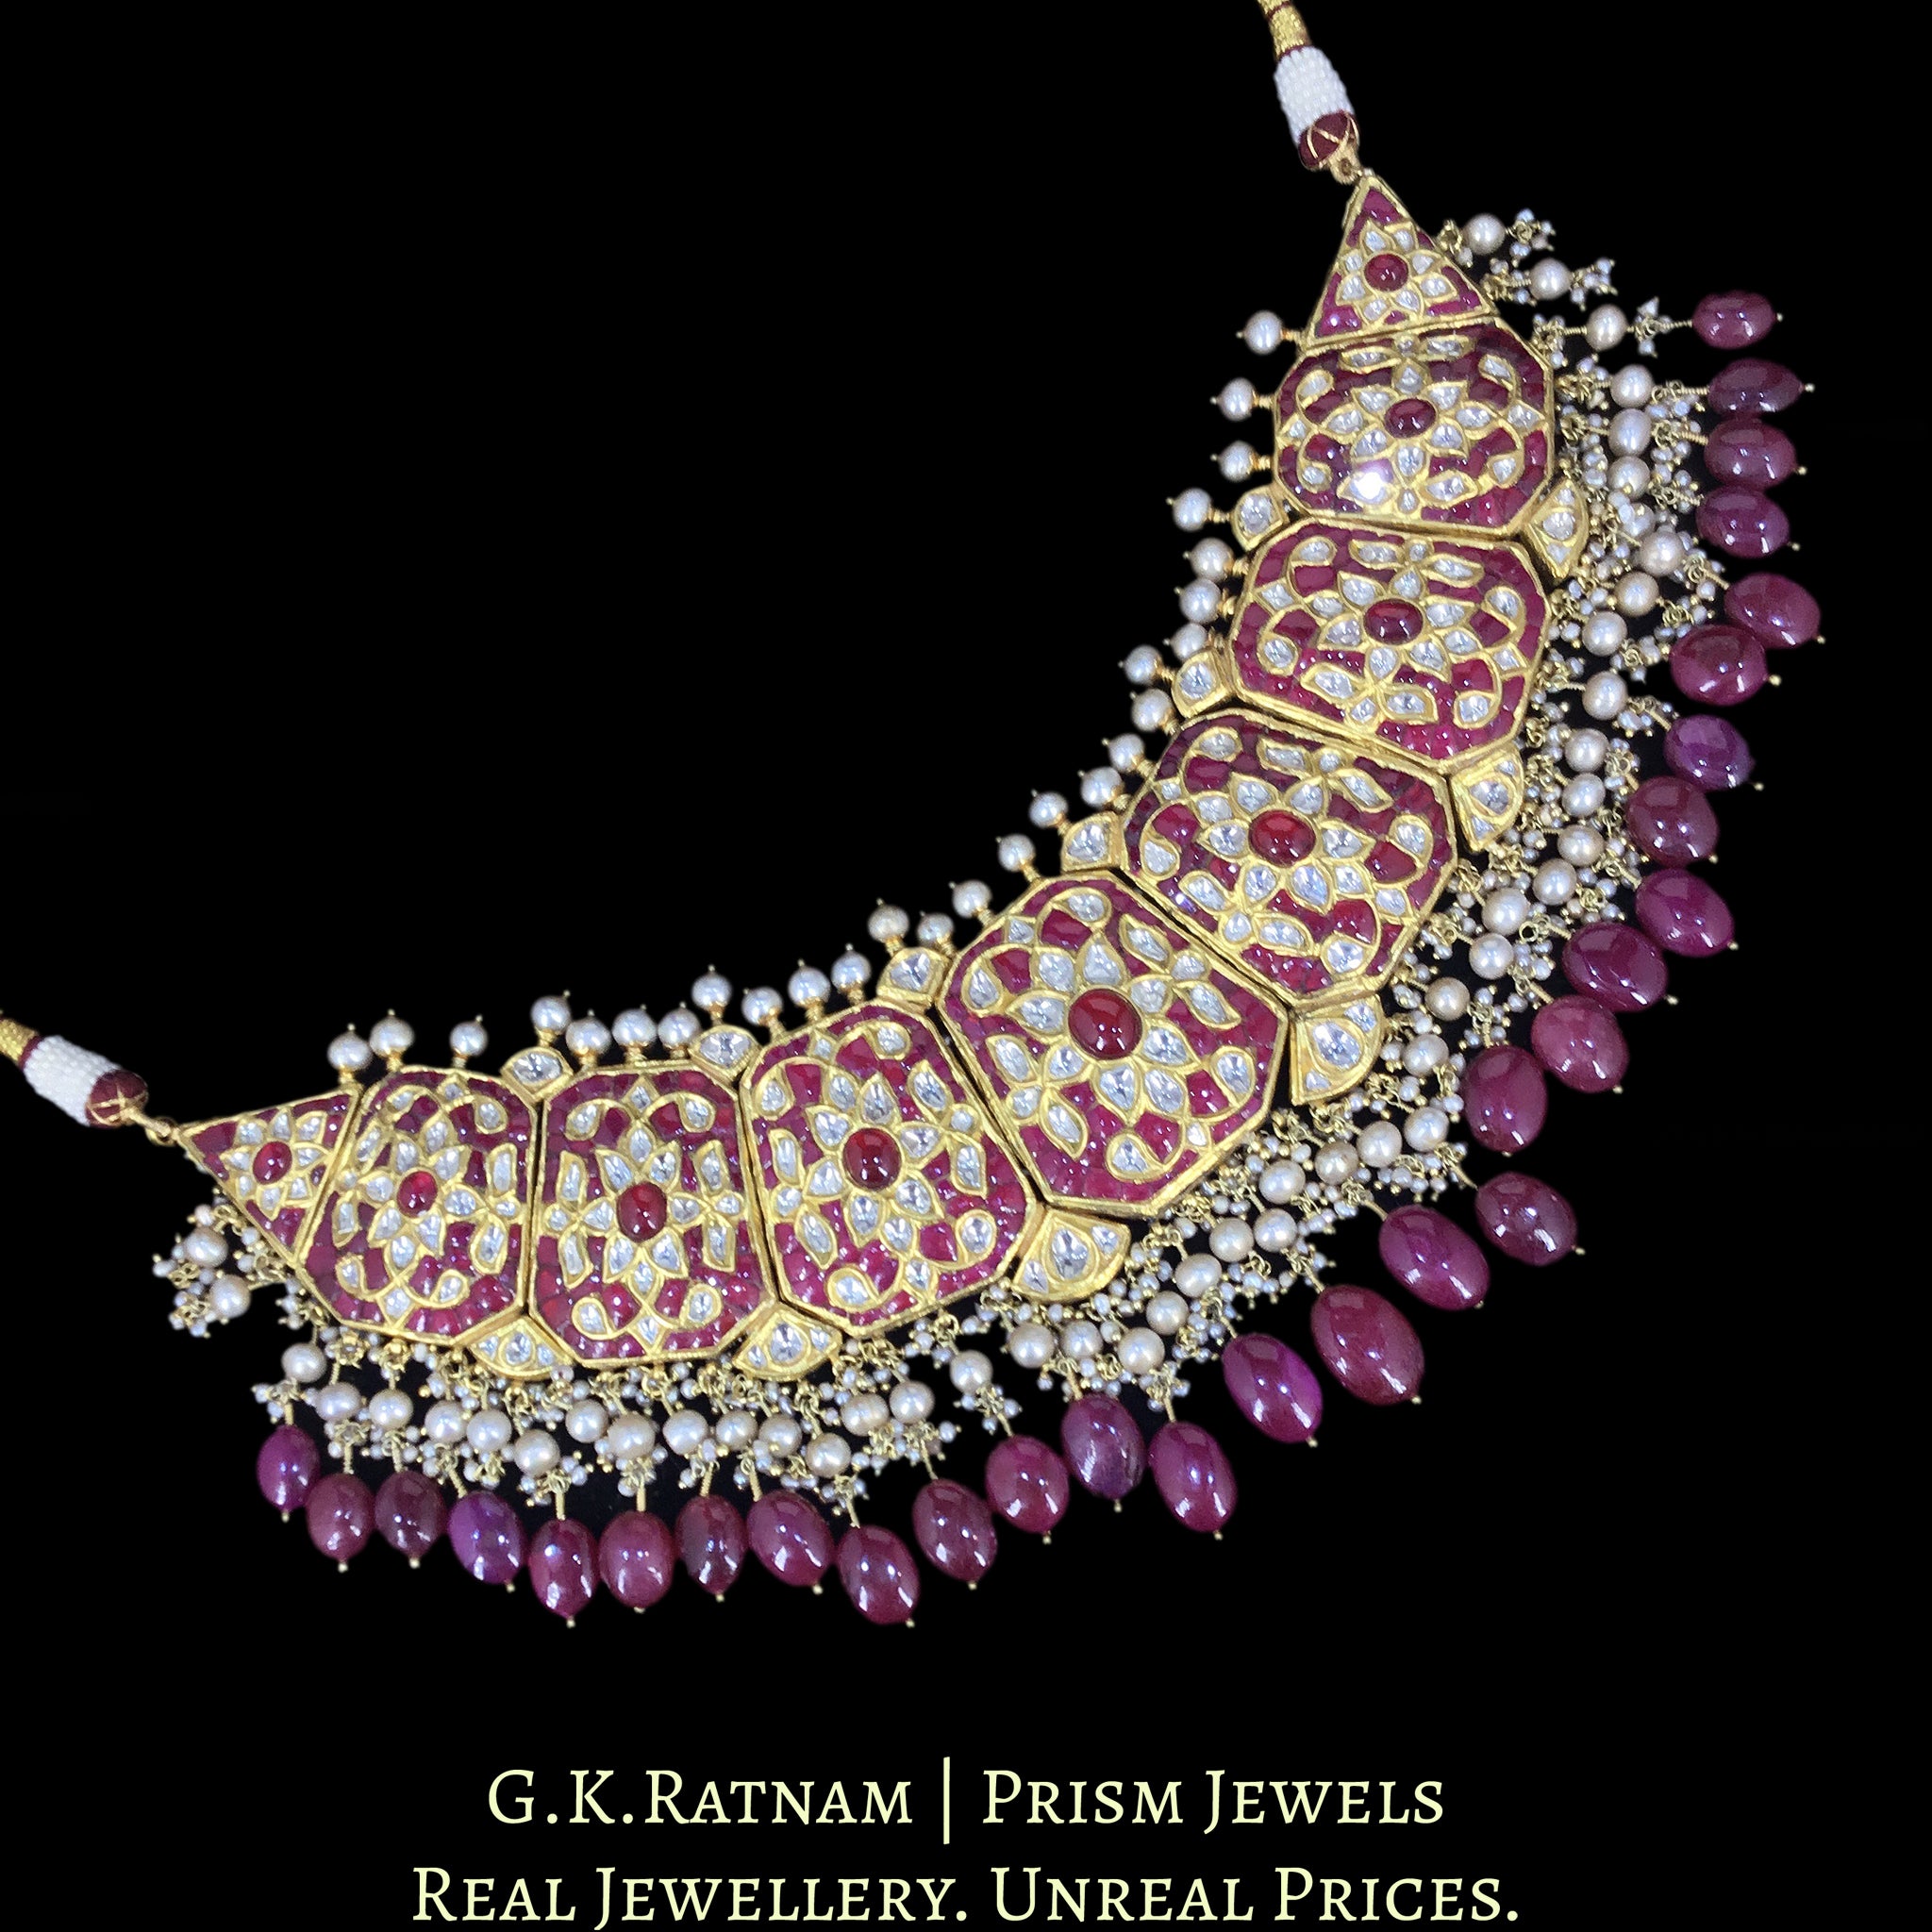 23K Gold and Diamond Polki Choker Necklace with octagonal motifs strung in Antiqued Freshwater Pearls & Rubies